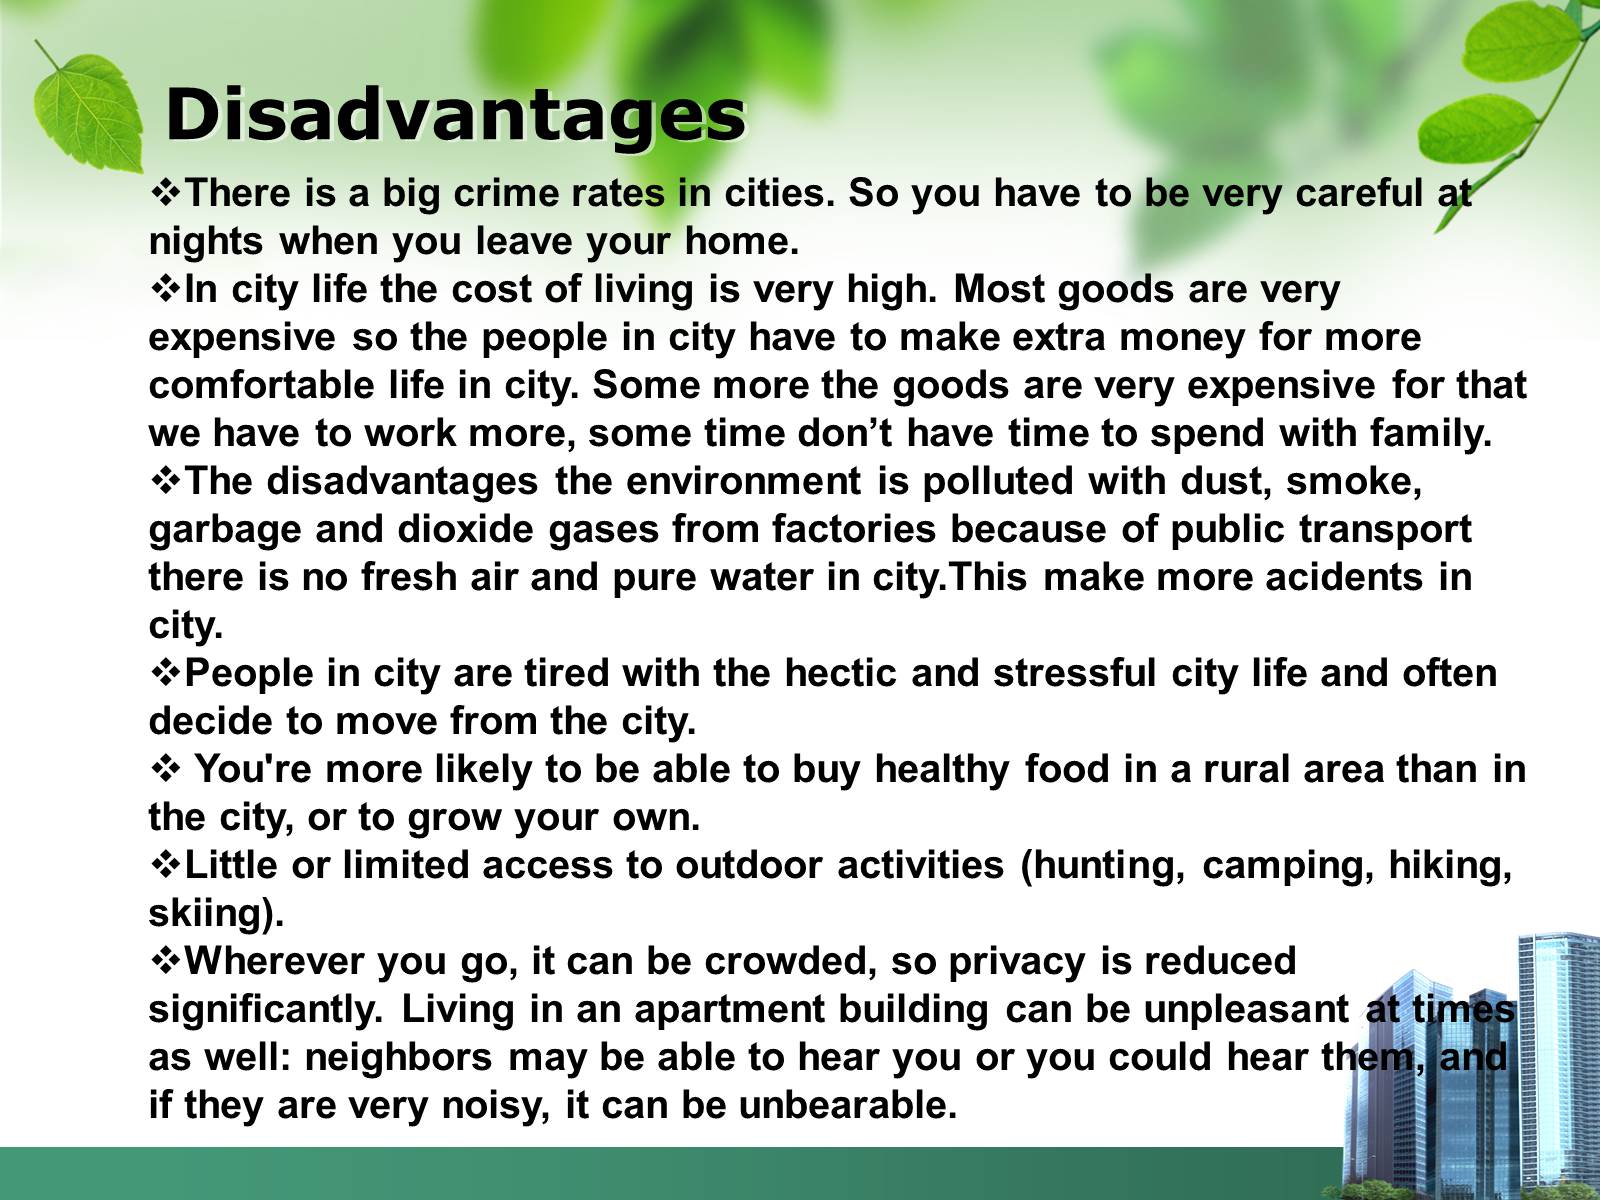 This is big city. Advantages and disadvantages of City Life. Темы для эссе по английскому advantages and disadvantages. Темы эссе advantages and disadvantages. Disadvantages of Living in the City.